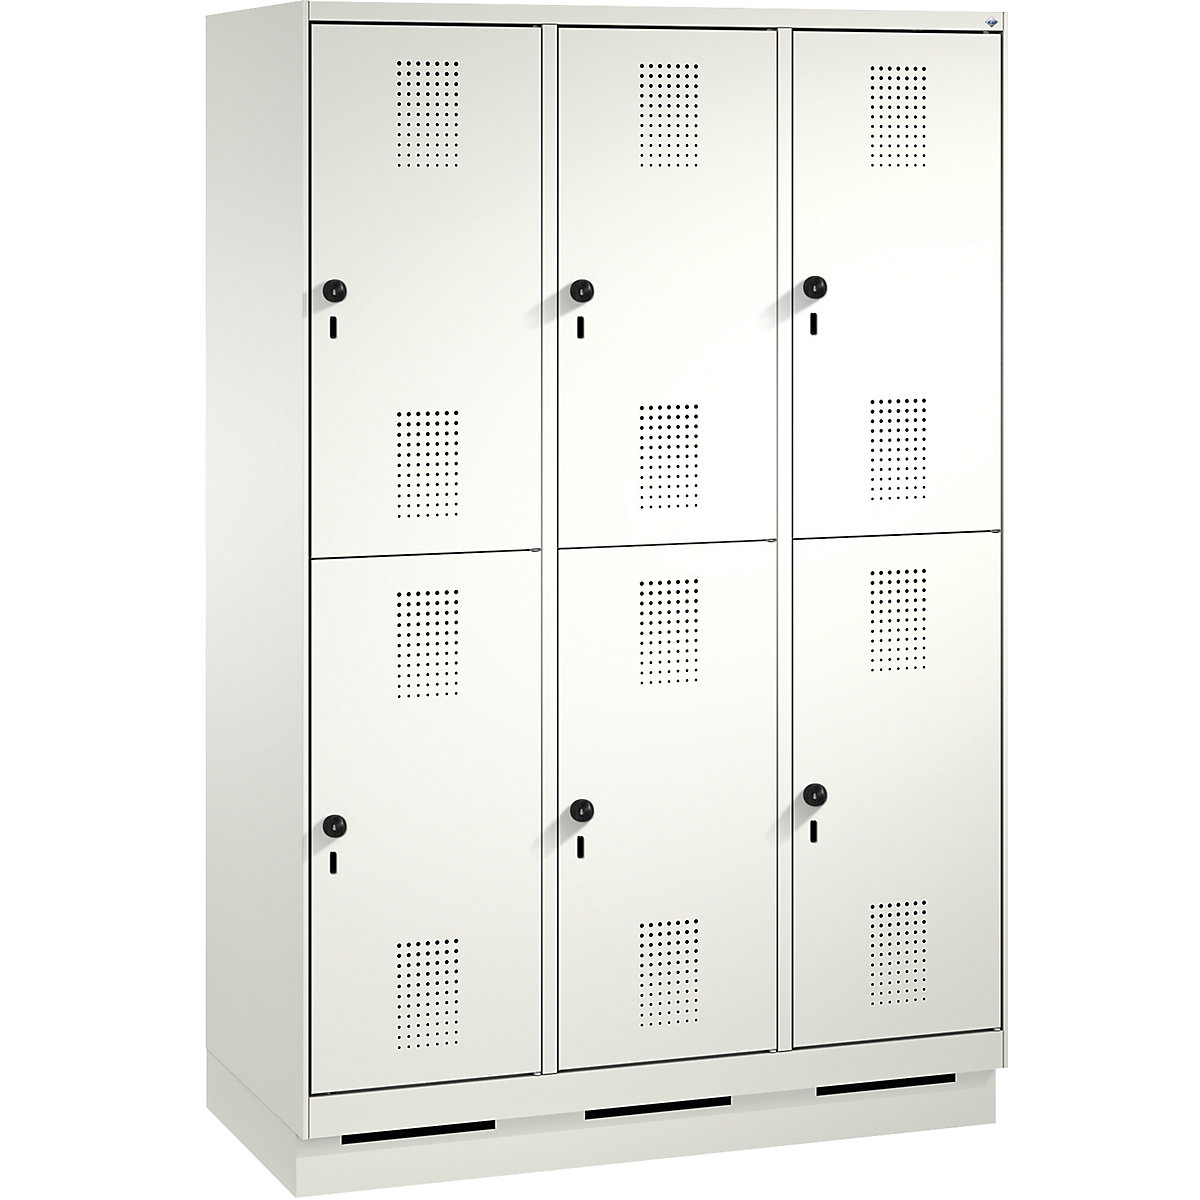 EVOLO cloakroom locker, double tier, with plinth – C+P, 3 compartments, 2 shelf compartments each, compartment width 400 mm, traffic white / traffic white-14